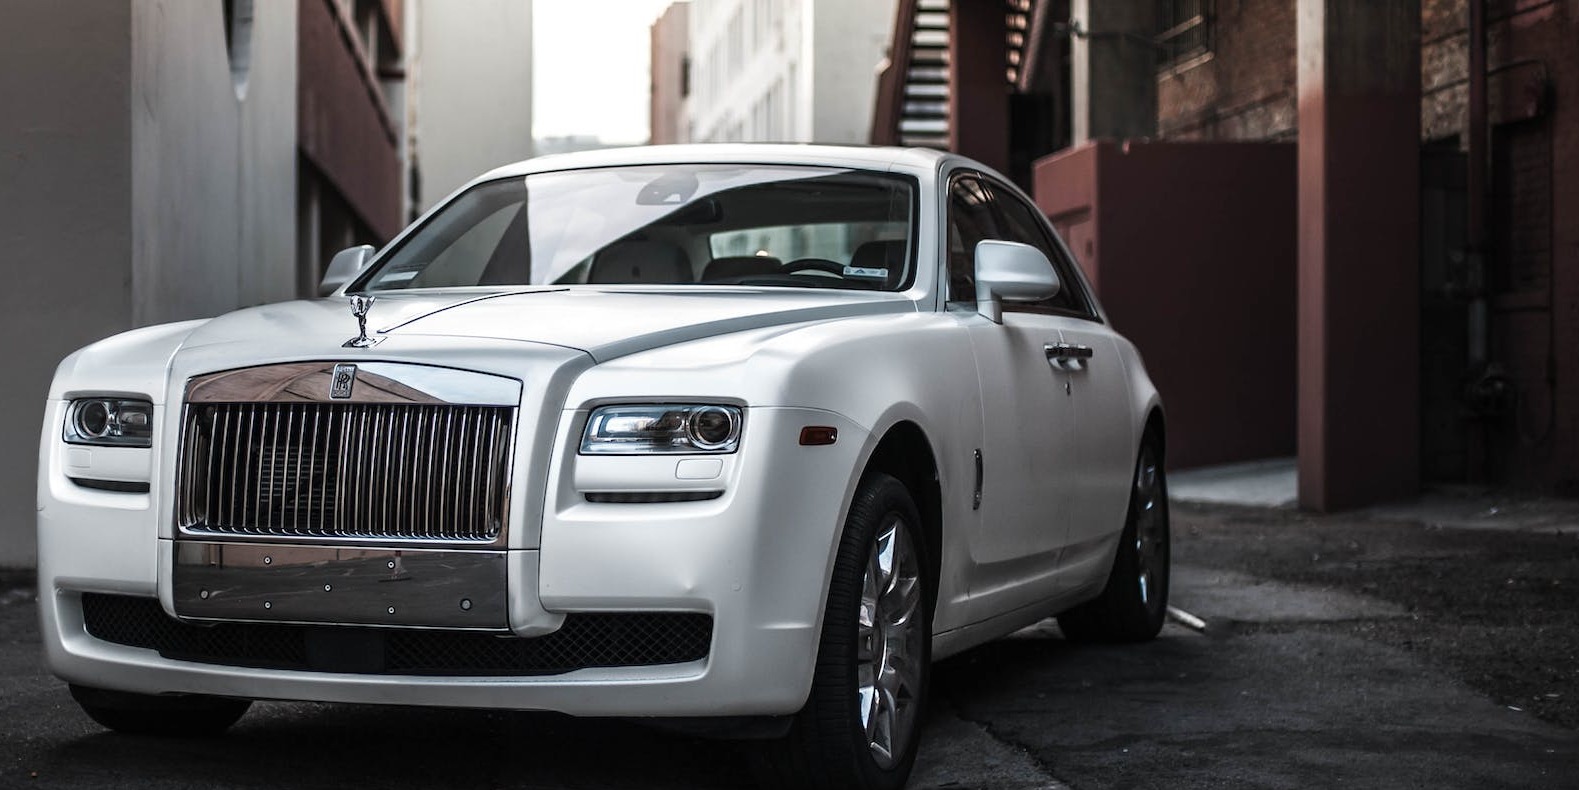 Elegant Duos: Coordinating Bride and Groom Cars with Rolls Royce and Bentley models